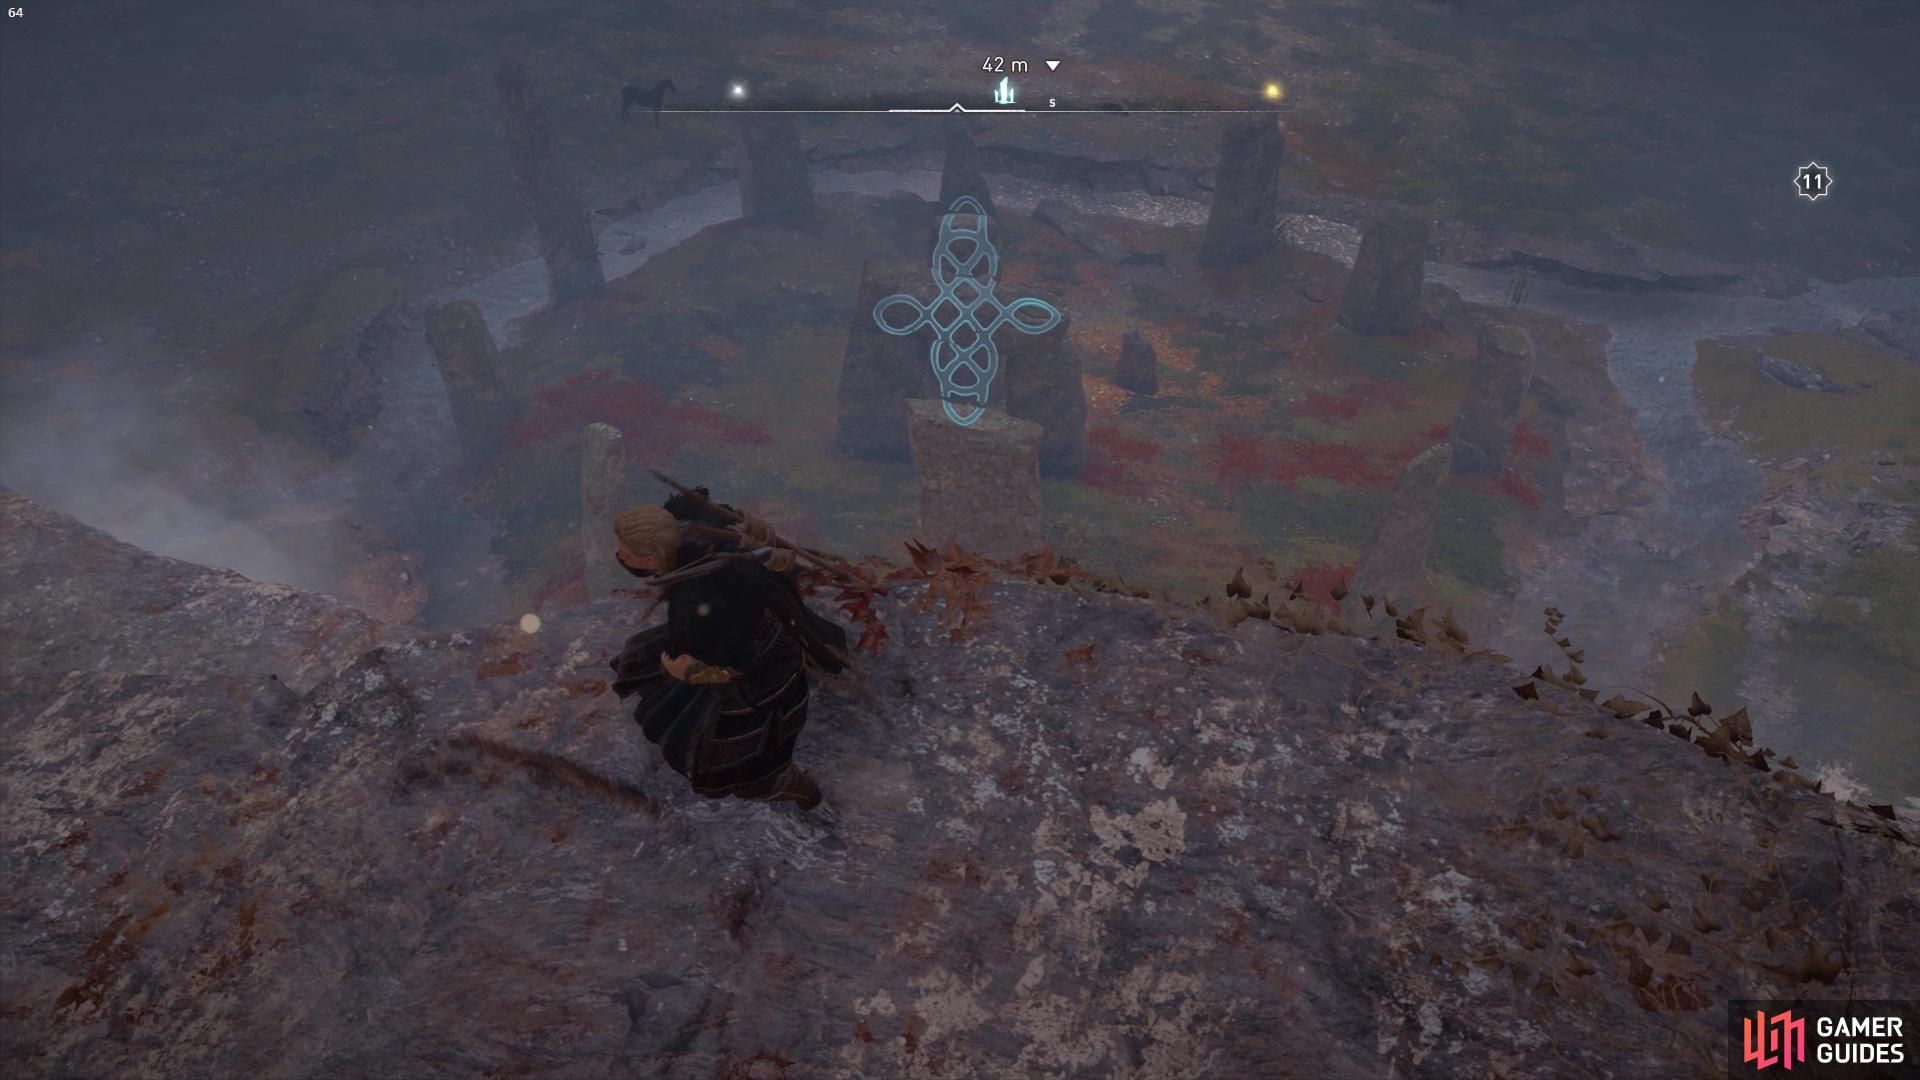 To align this symbol you'll need to head up onto the top of the cliff near the waterfall.